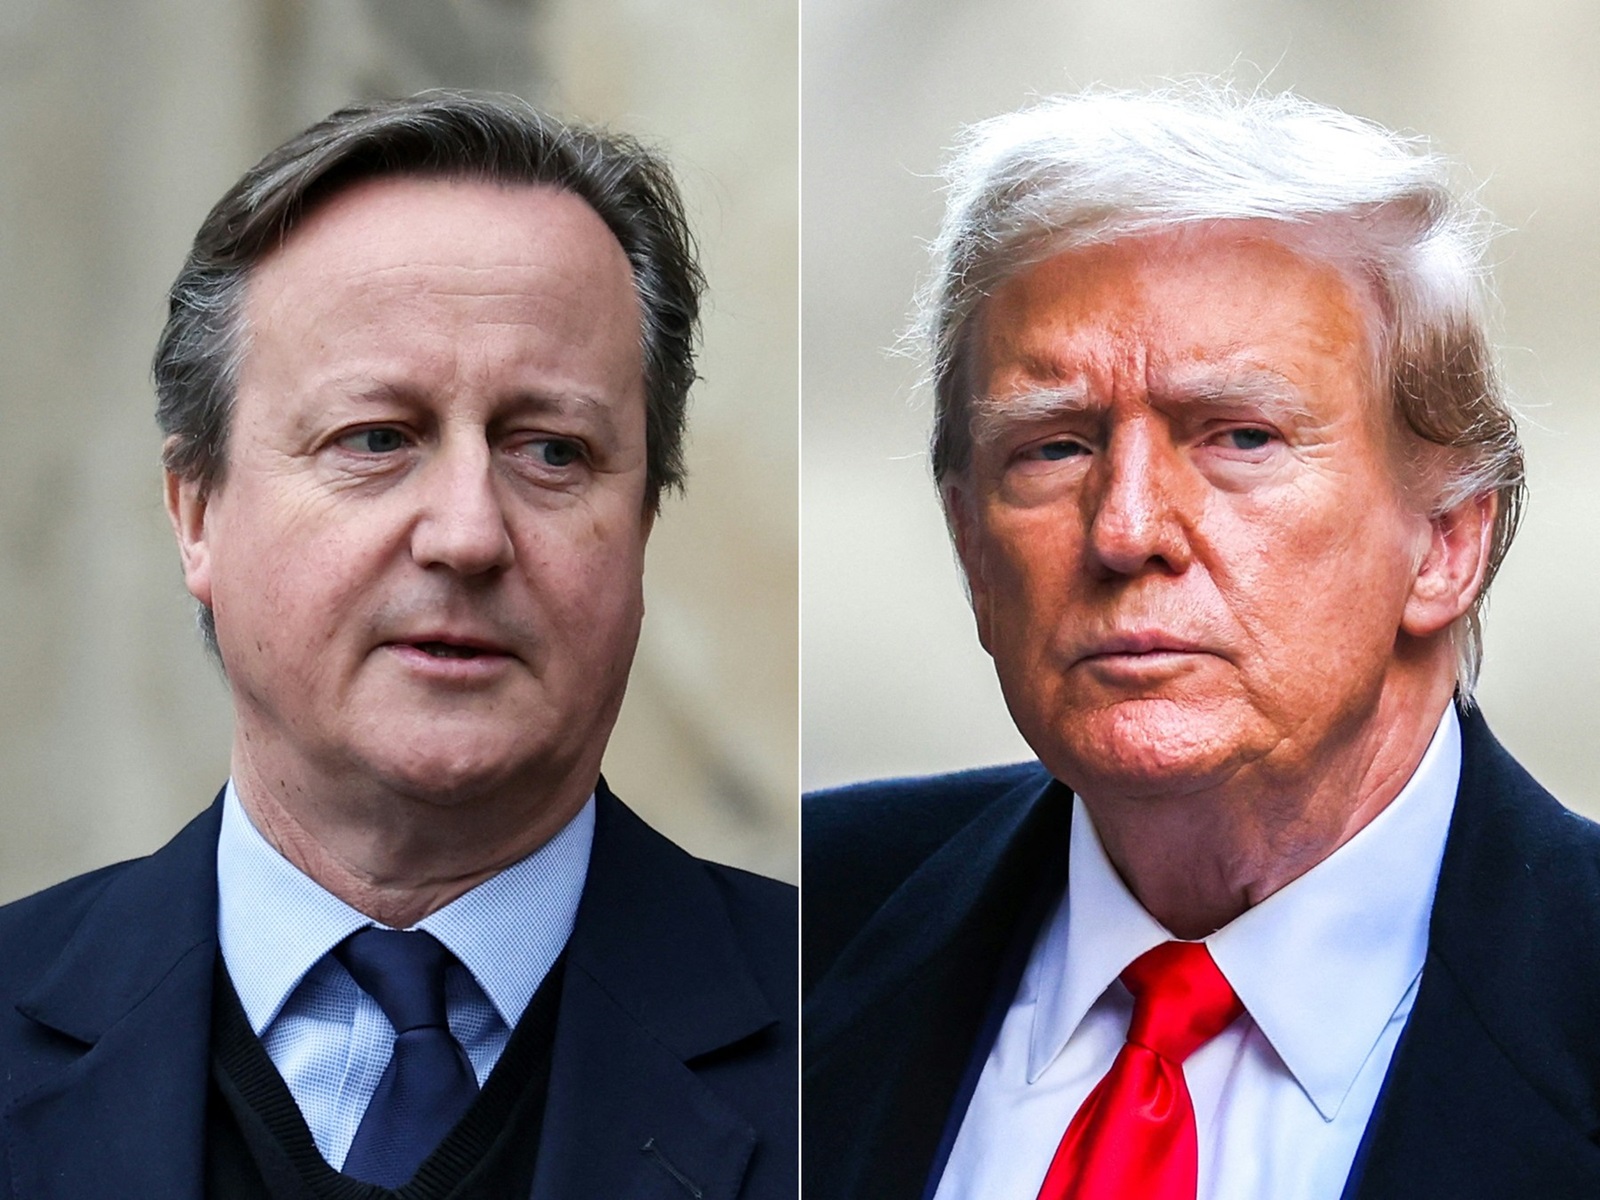 (COMBO) This combination of pictures created on April 08, 2024 shows Britain's Foreign Secretary David Cameron in London, on March 11, 2024 and former US President Donald Trump in New York City on March 25, 2024.
 UK Foreign Secretary David Cameron was scheduled to meet April 8 with White House hopeful Donald Trump, British officials said, ahead of talks with senior members of President Joe Biden's administration on the wars in Gaza and Ukraine.
Cameron was due to sit down with the former US president and Republican challenger to Biden in November's closely watched election one month after the two Americans became their parties' presumptive White House nominees.,Image: 863450588, License: Rights-managed, Restrictions: , Model Release: no, Credit line: Charly TRIBALLEAU / AFP / Profimedia